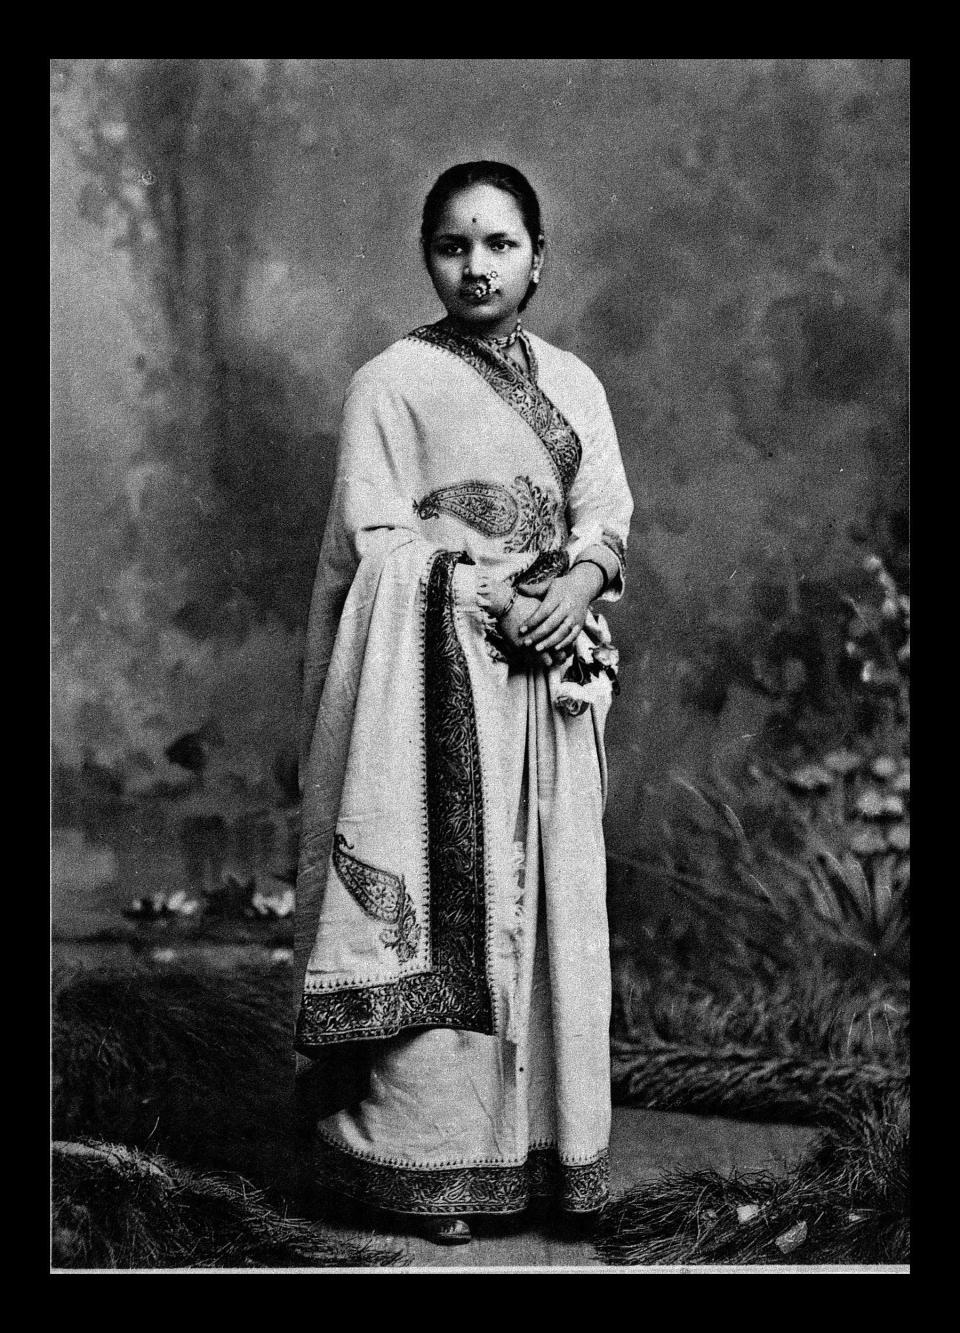 Anandi Joshi graduated from the Woman’s Medical College in Philadelphia in 1886, the first Indian woman to attend and graduate with a medical degree from an American college.